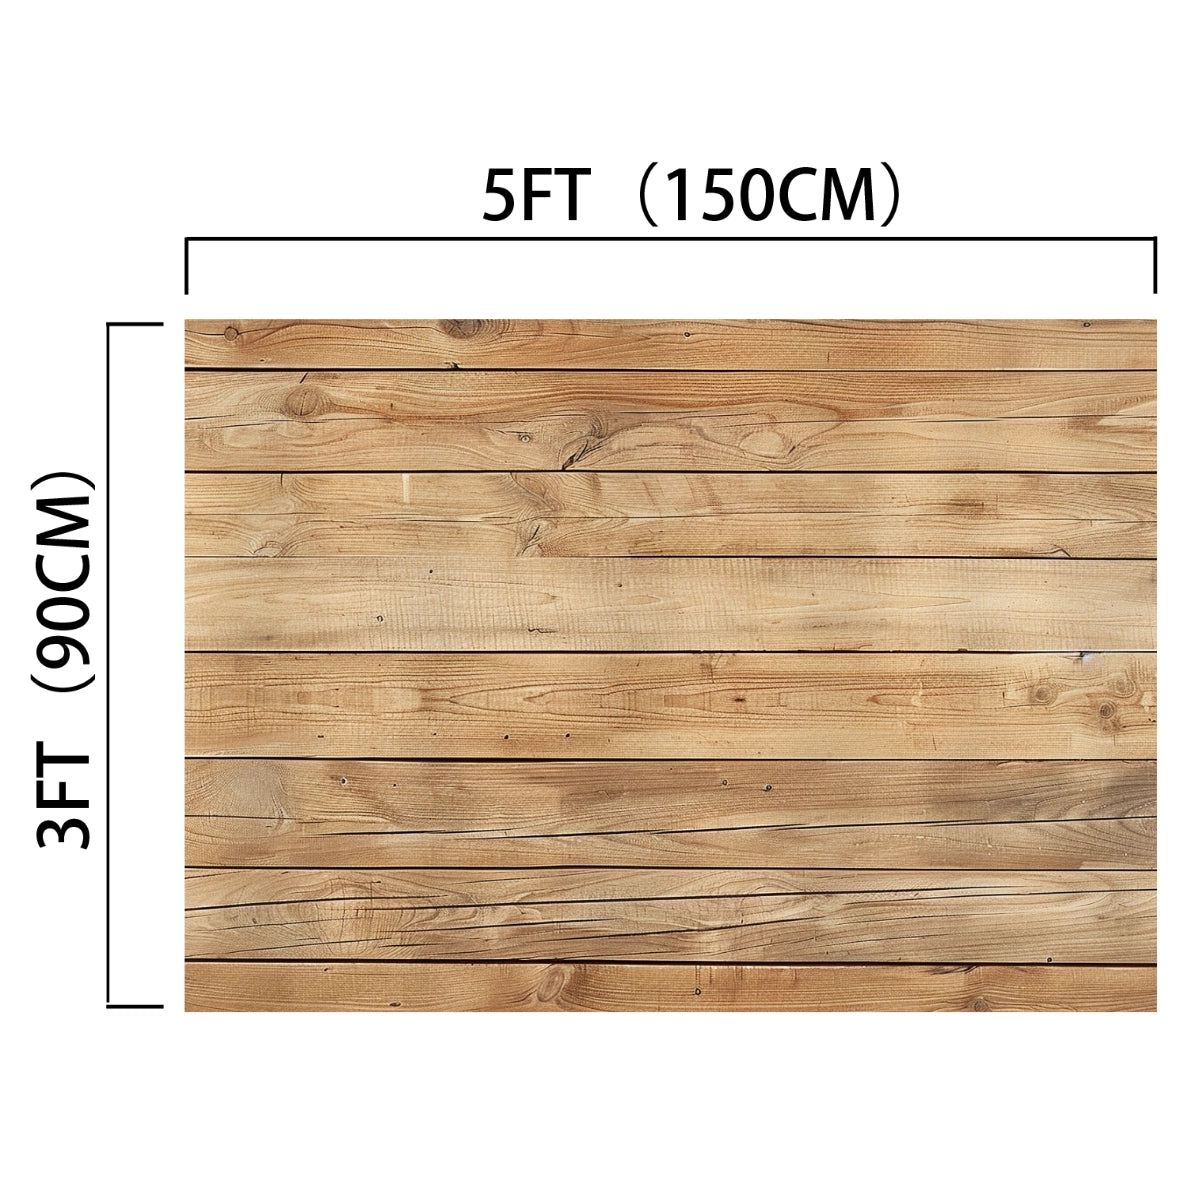 ideasbackdrop 7x5ft Wooden Backdrop Baby Shower Wood Wall Background Party Decorations Props for Photographers Studio featuring a wooden surface with horizontal planks, measuring 5 feet (150 cm) in width and 3 feet (90 cm) in height.